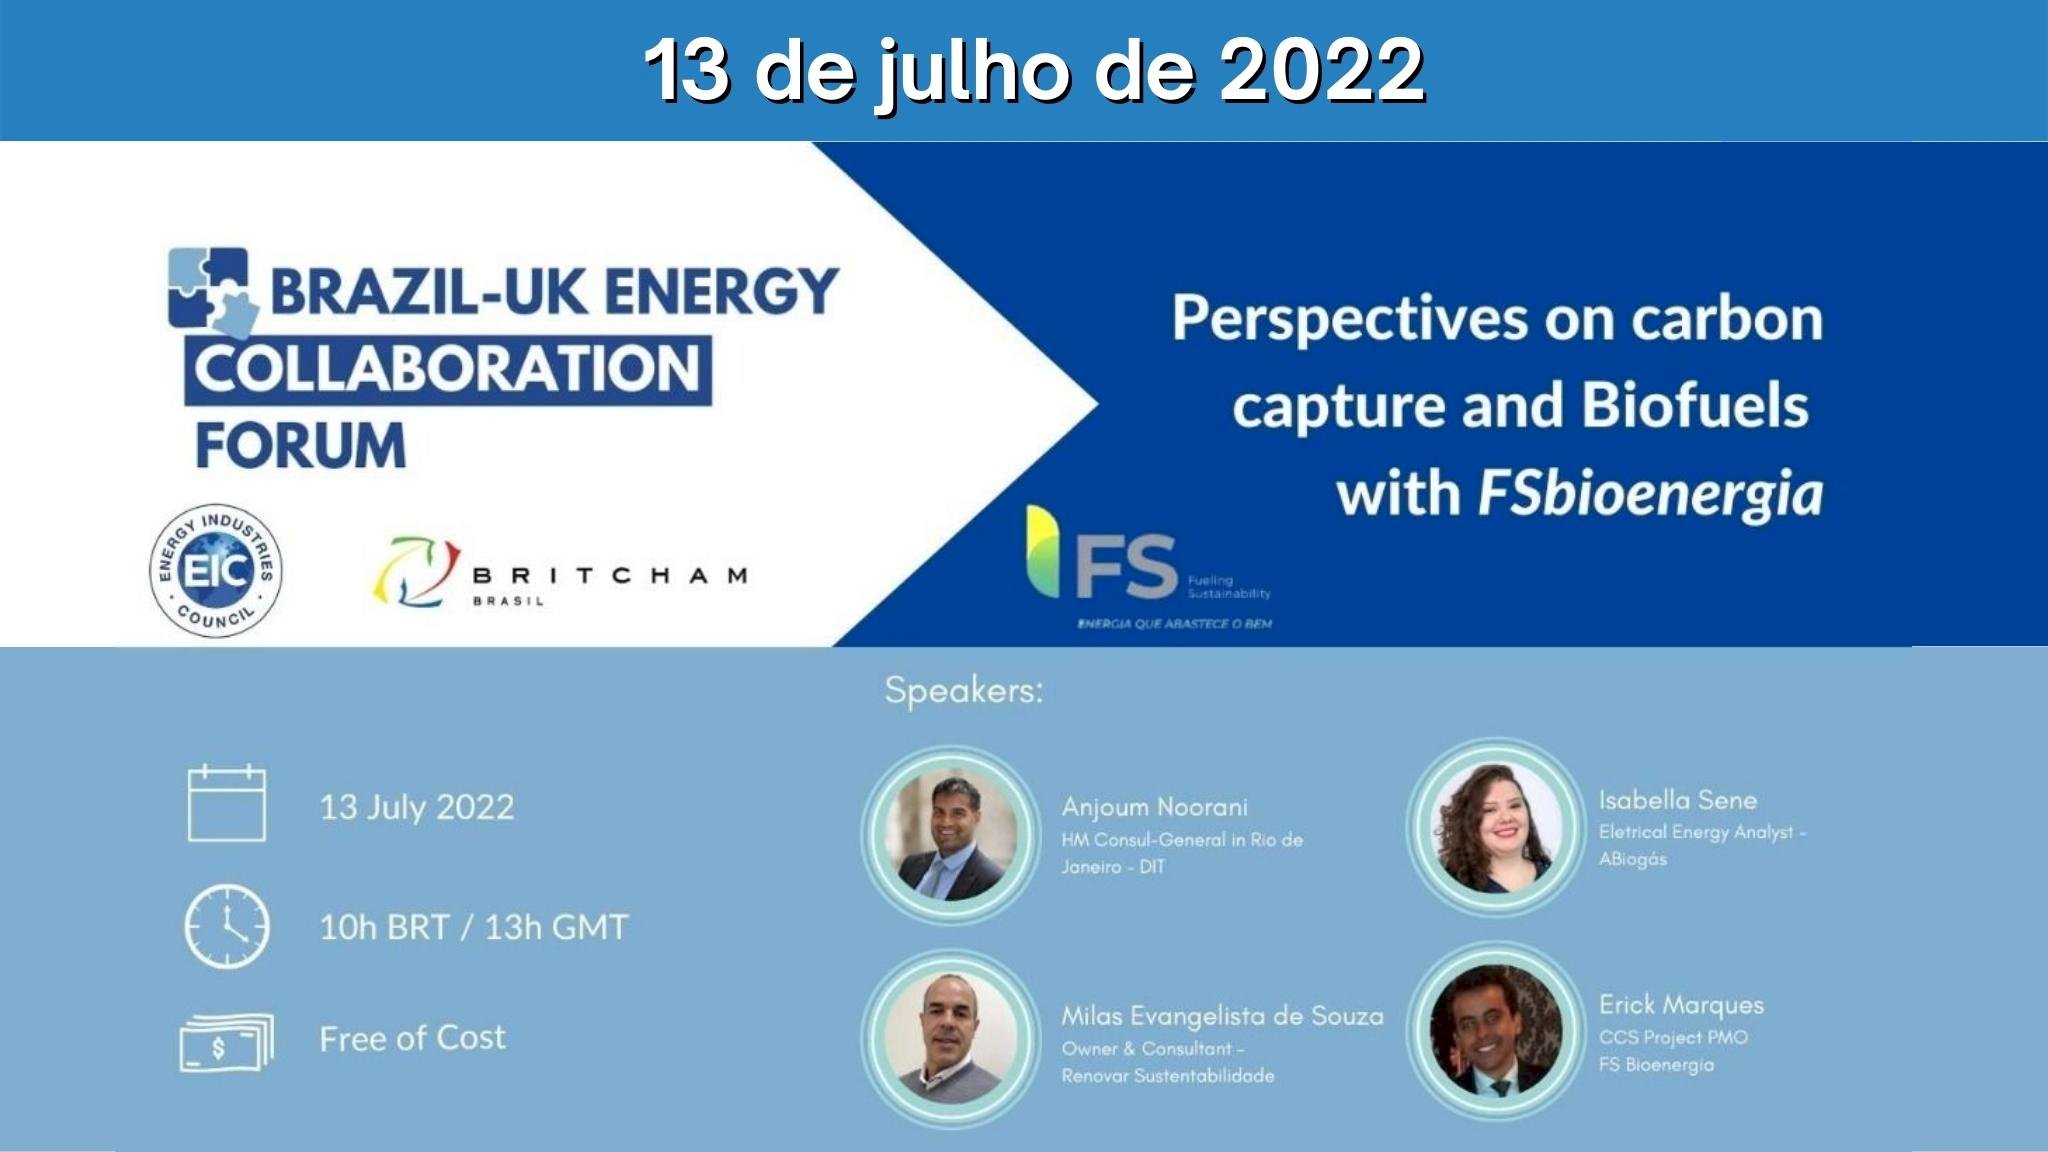 BR-UK Energy Collab. Forum: Carbon capture and Biofuels with FSbioenergia